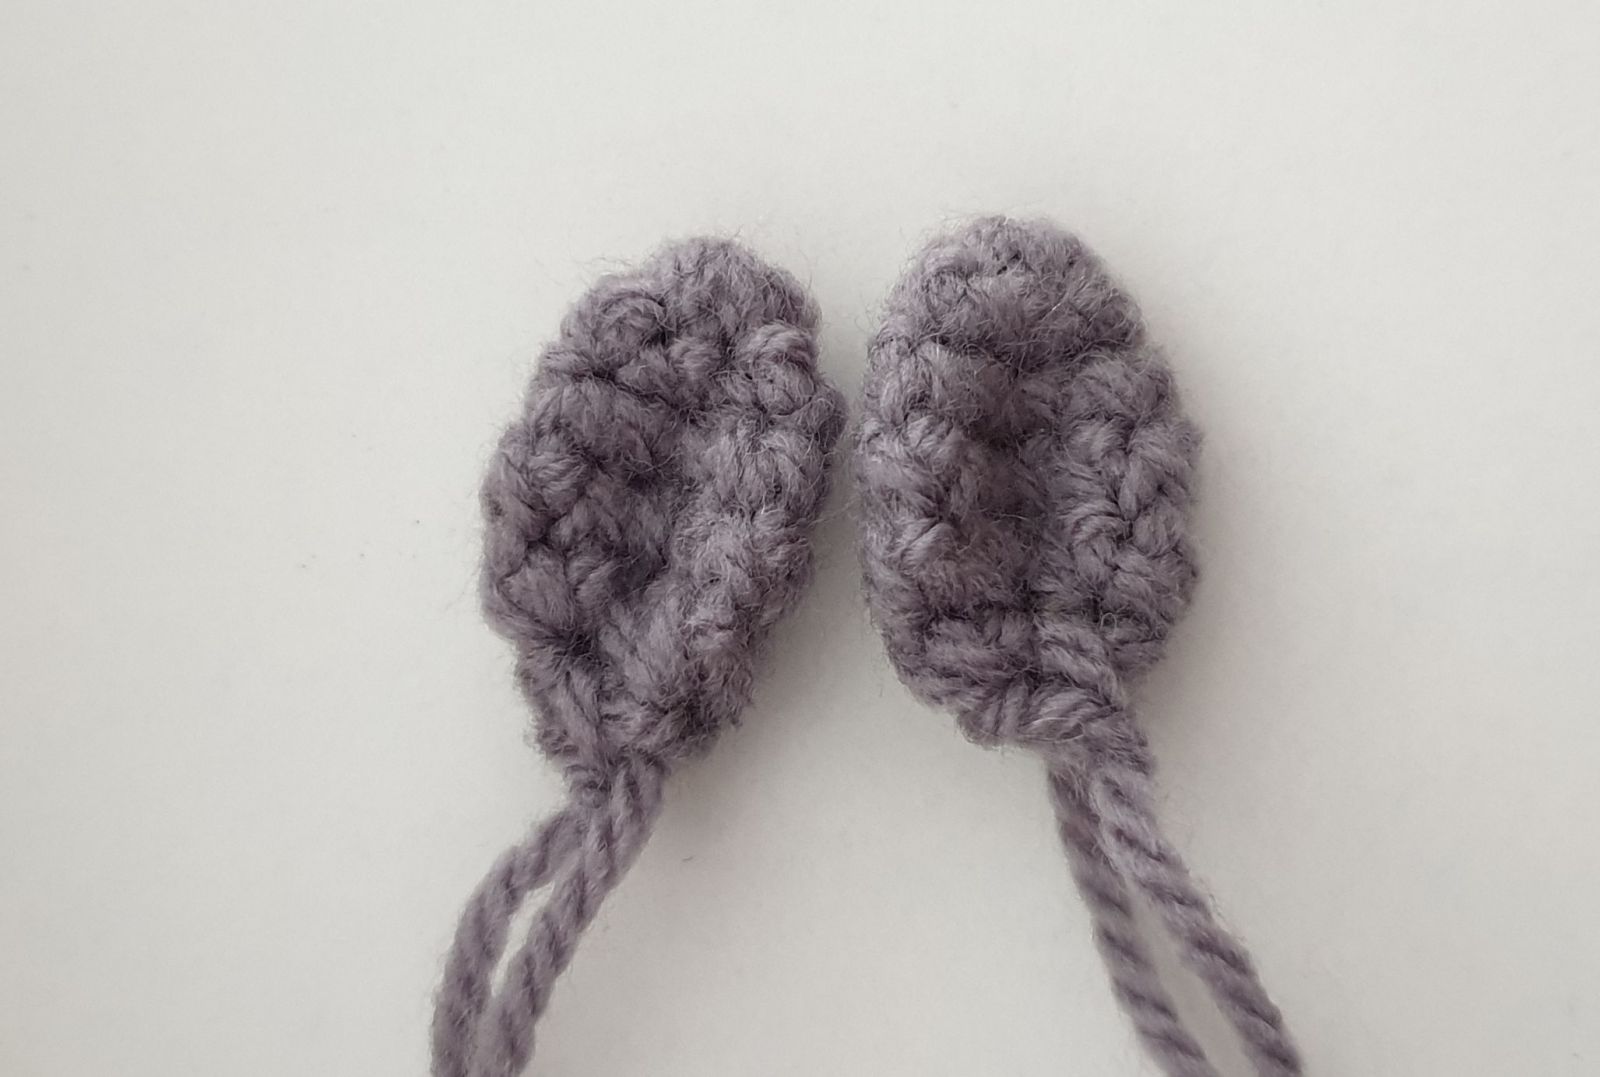 Blog content image for 'Free crochet pattern kids slippers'